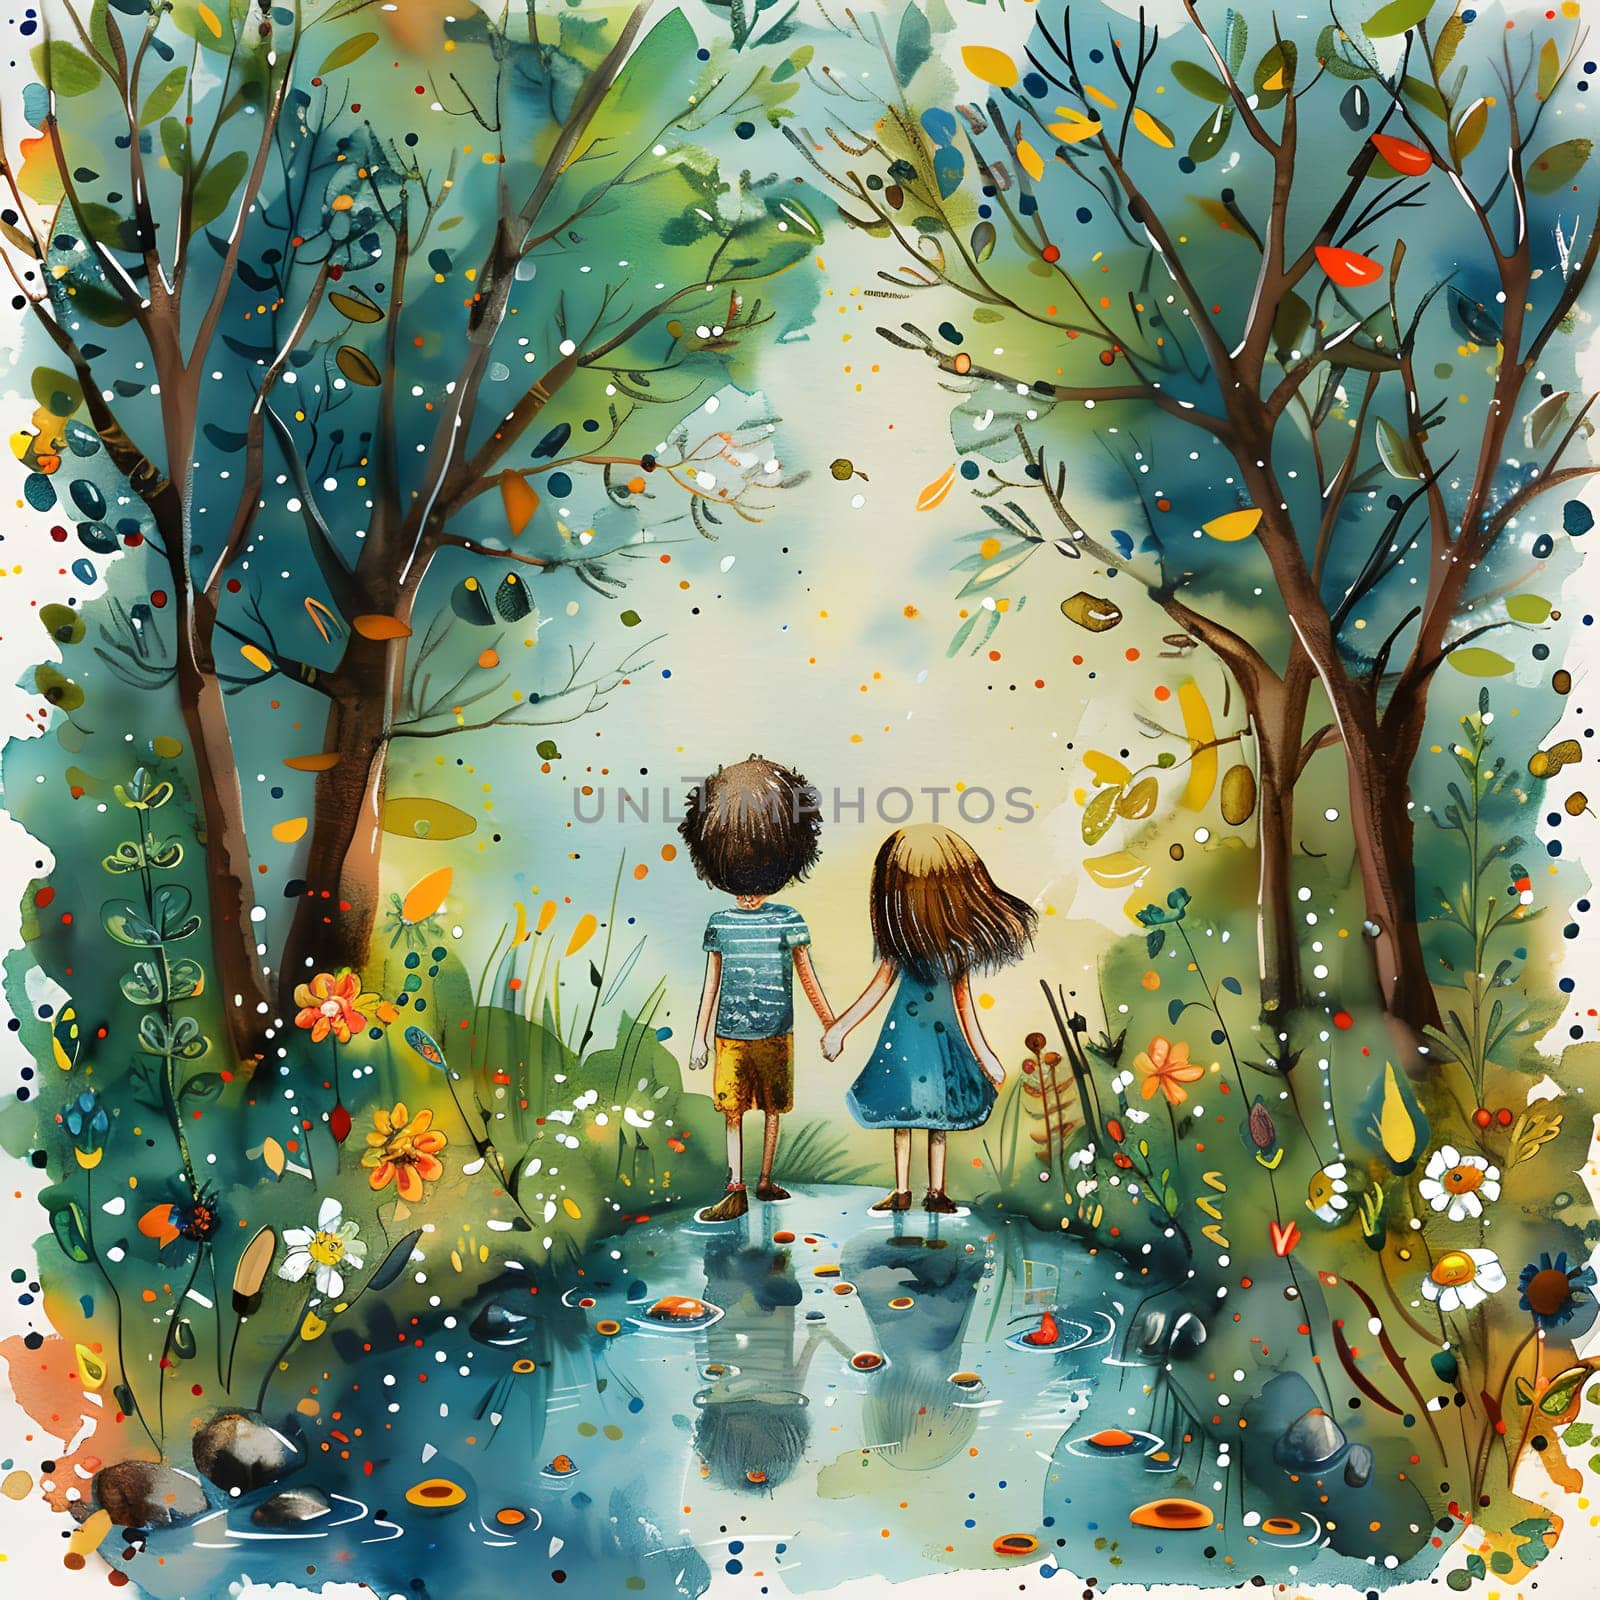 A couple is strolling hand in hand along the river, surrounded by the beauty of nature. The tree branches and natural landscape add to the picturesque scene, resembling a painting in real life